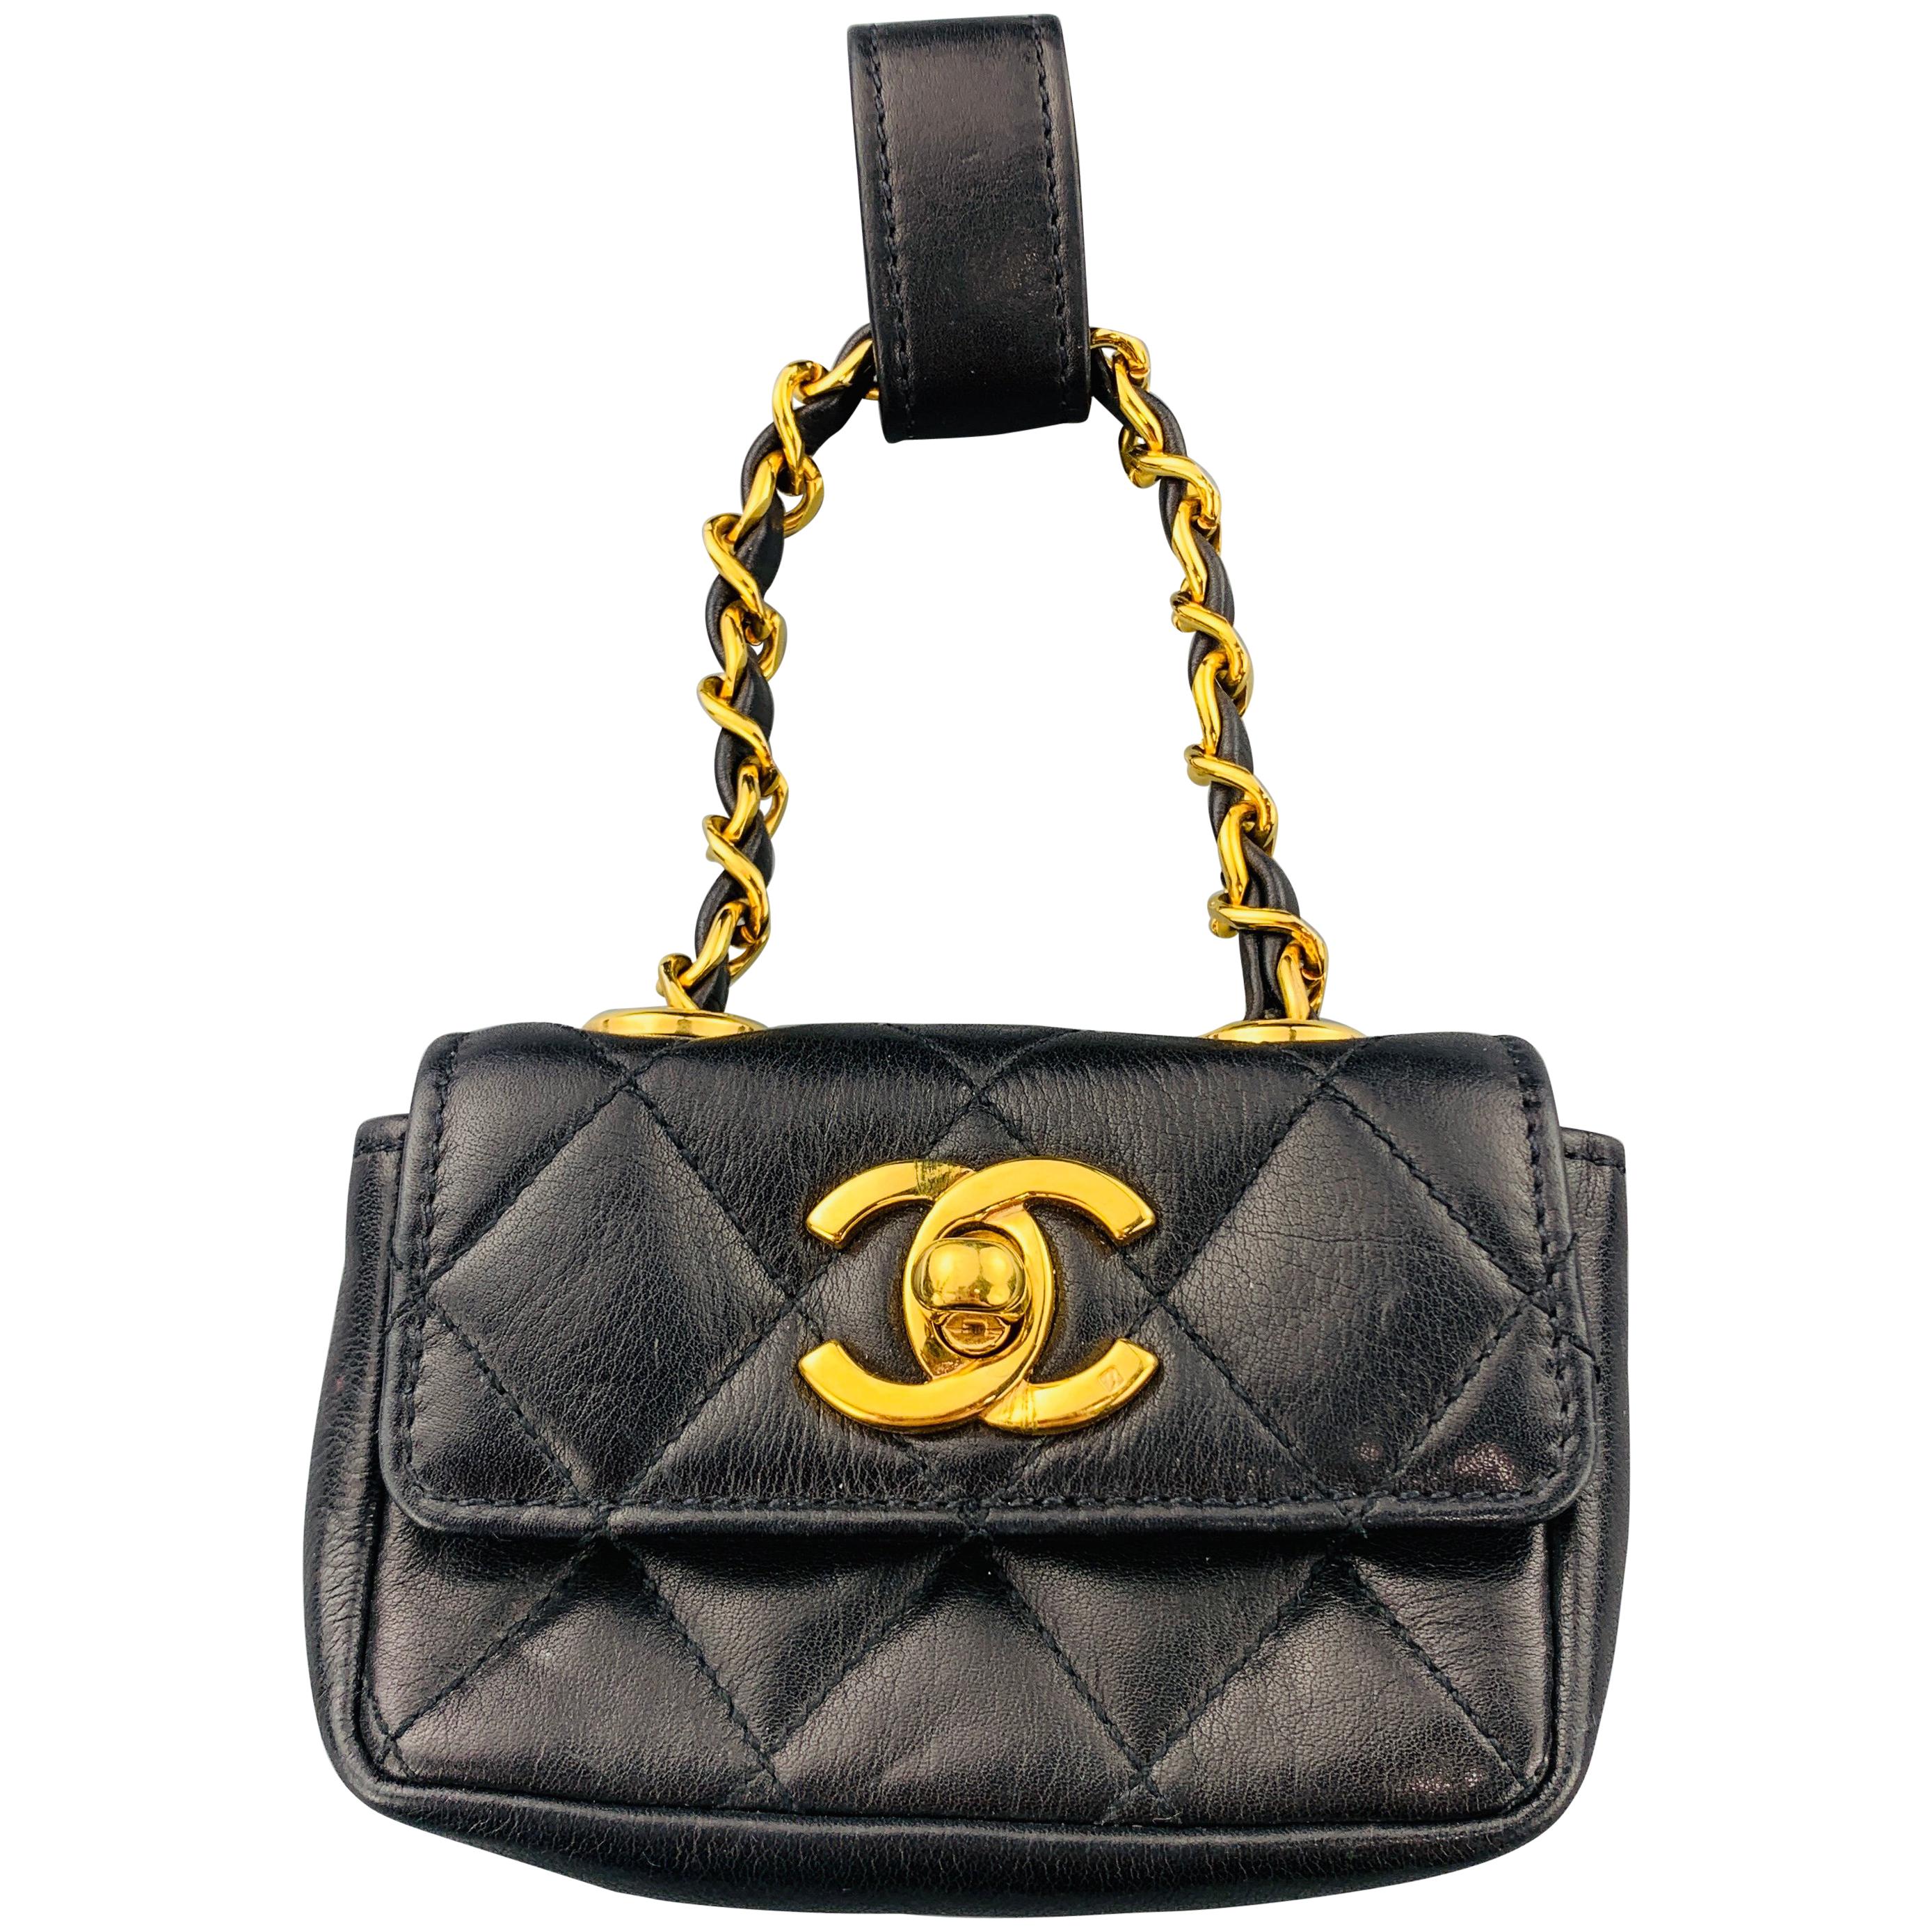 CHANEL Vintage Black Quilted Leather Mini Charm Pouch Purse Bag